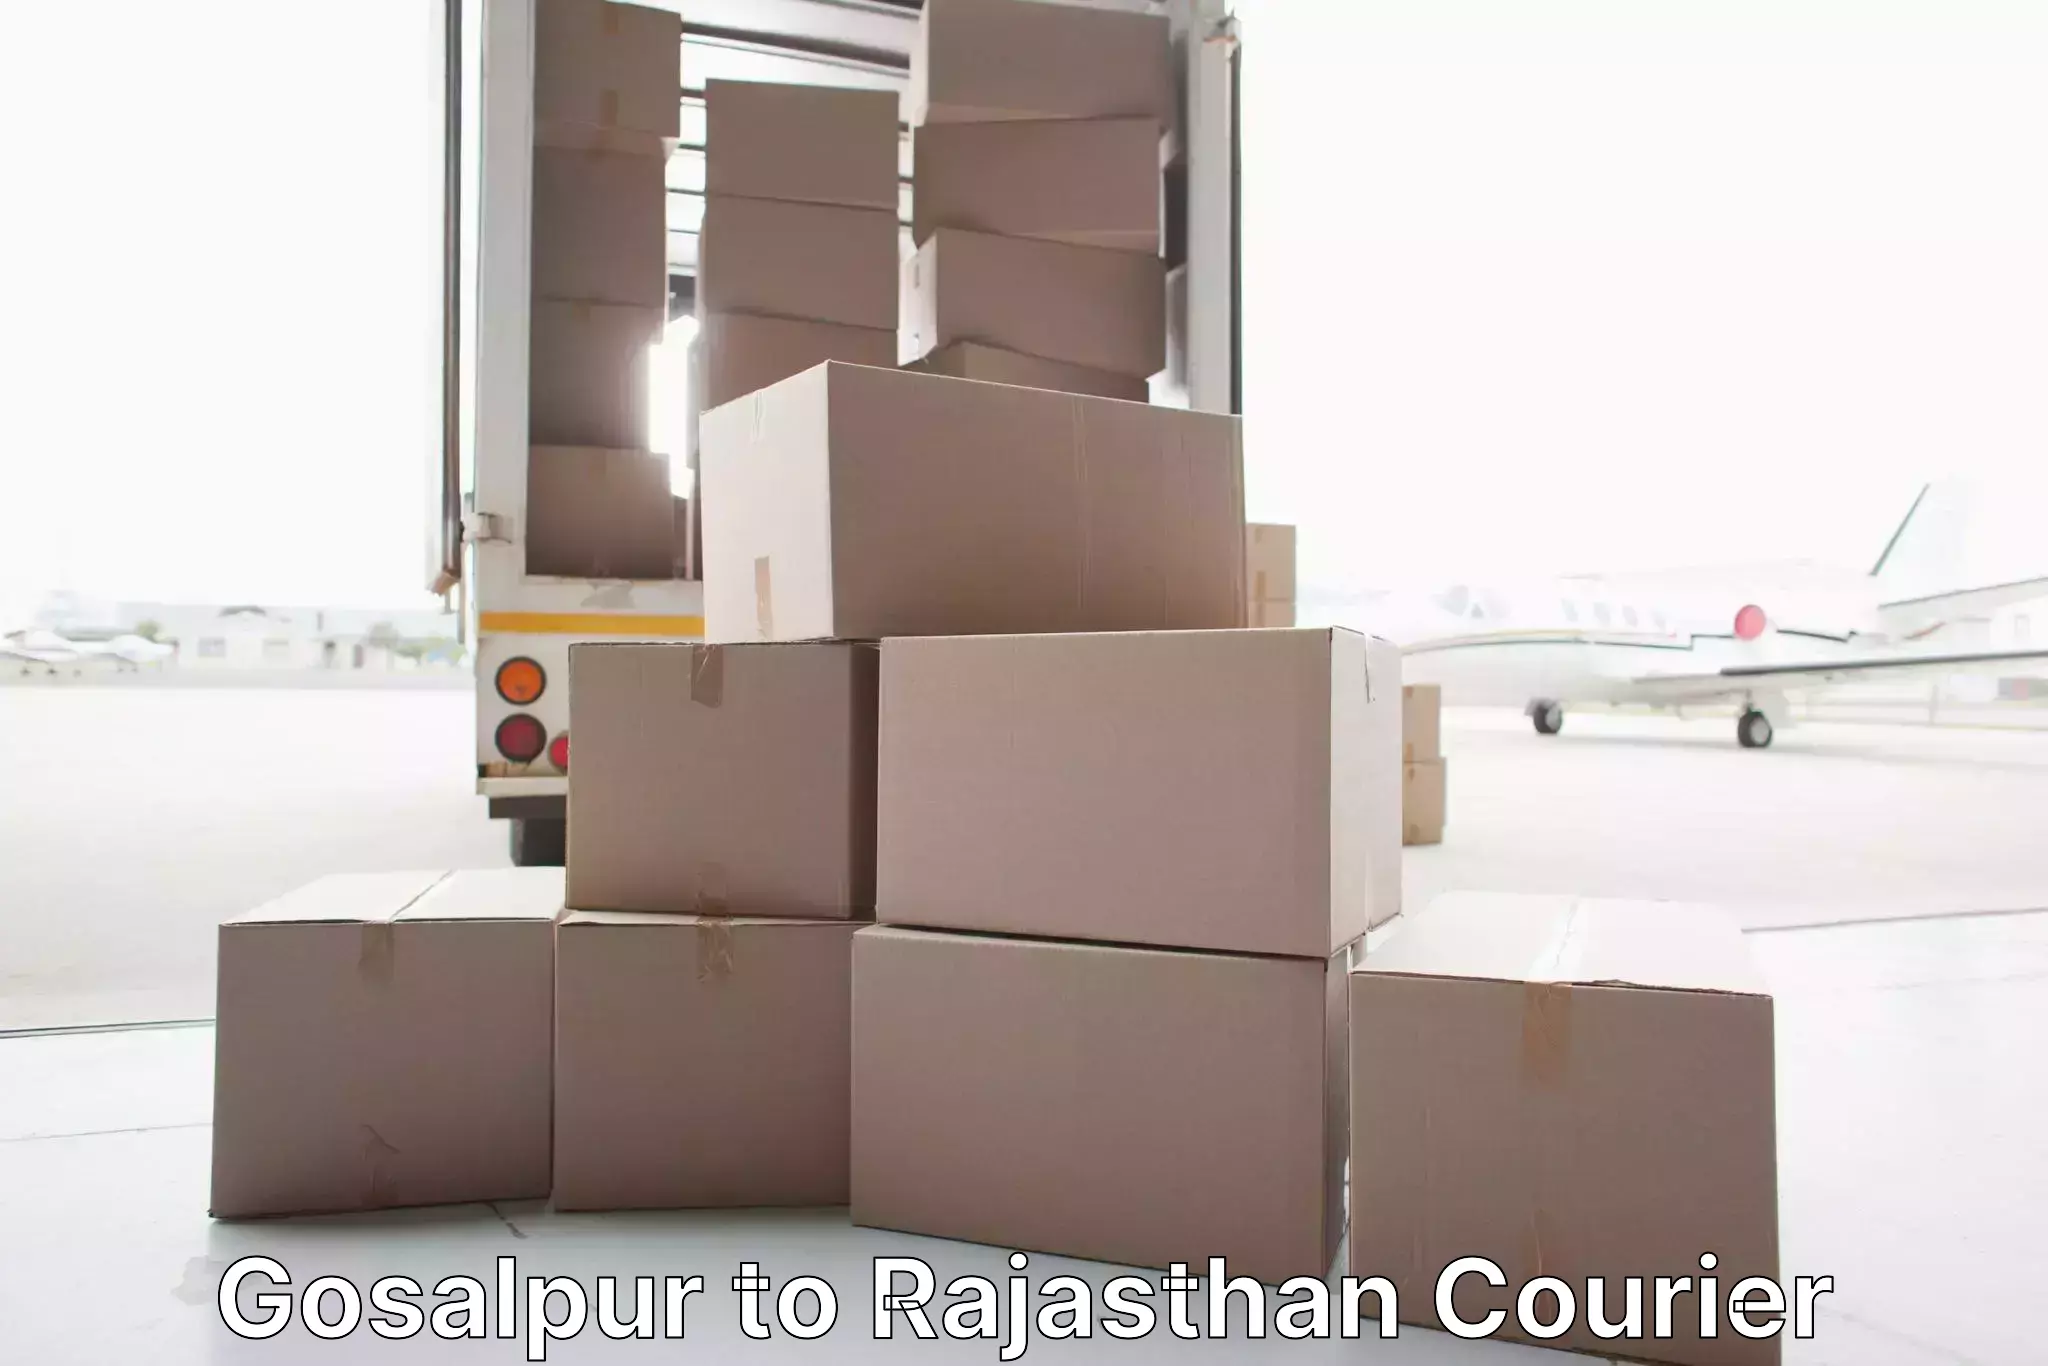 Professional packing services Gosalpur to Alwar